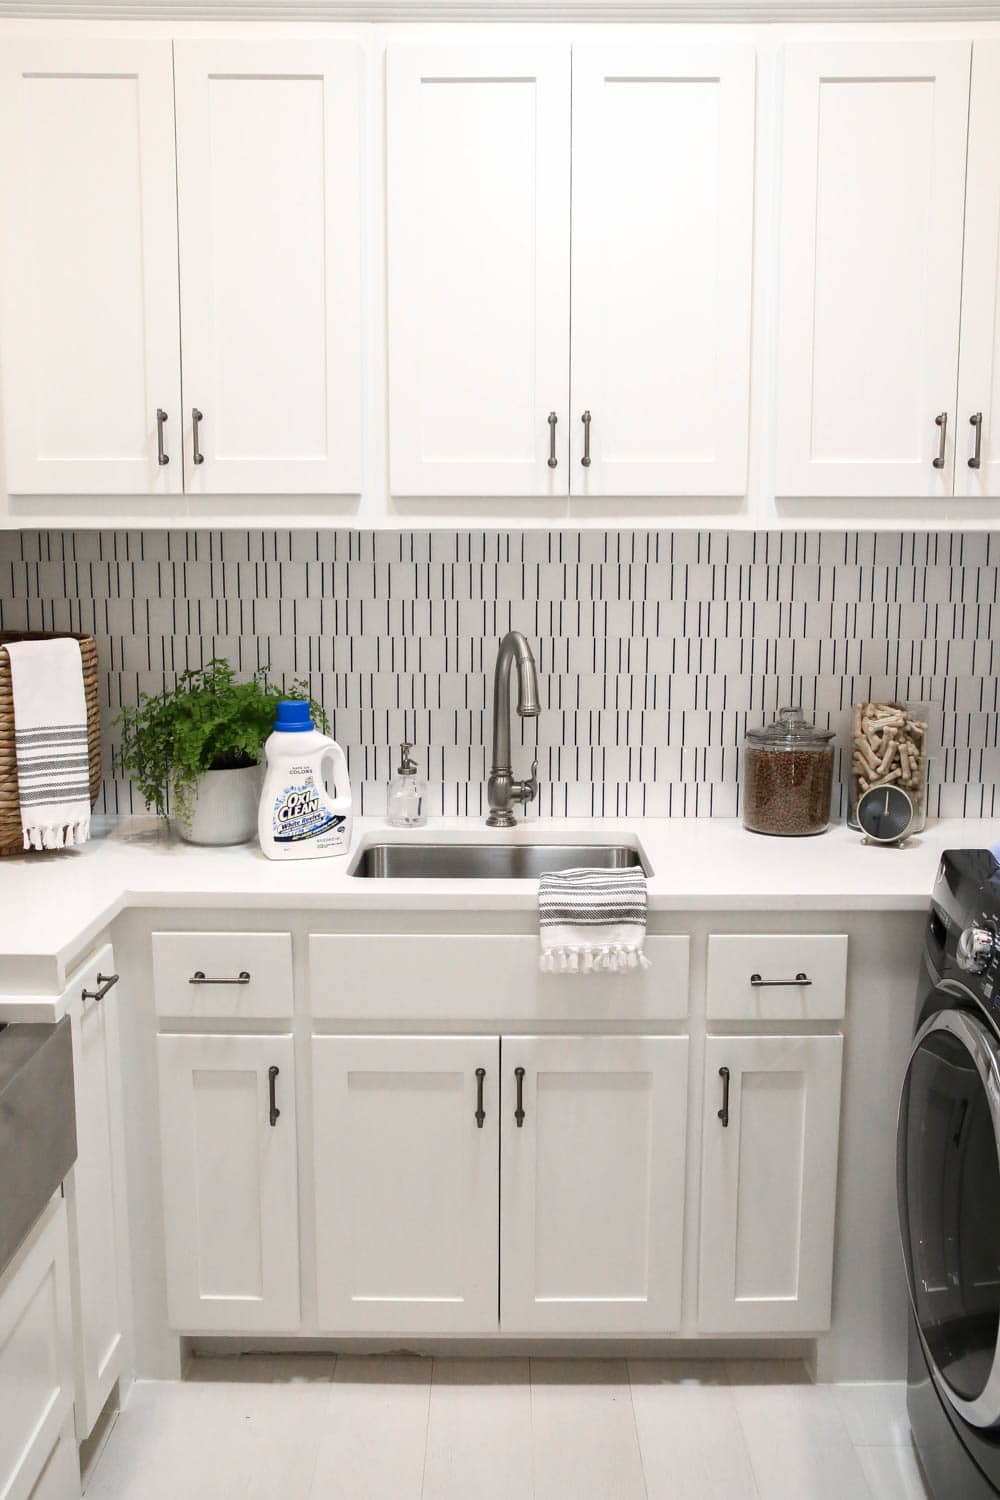 Everyone needs these OxiClean products in their cleaning and Laundry room cabinets to take care of your home. #ad #OxiClean #OxiCleanWOW #SmartSolutions